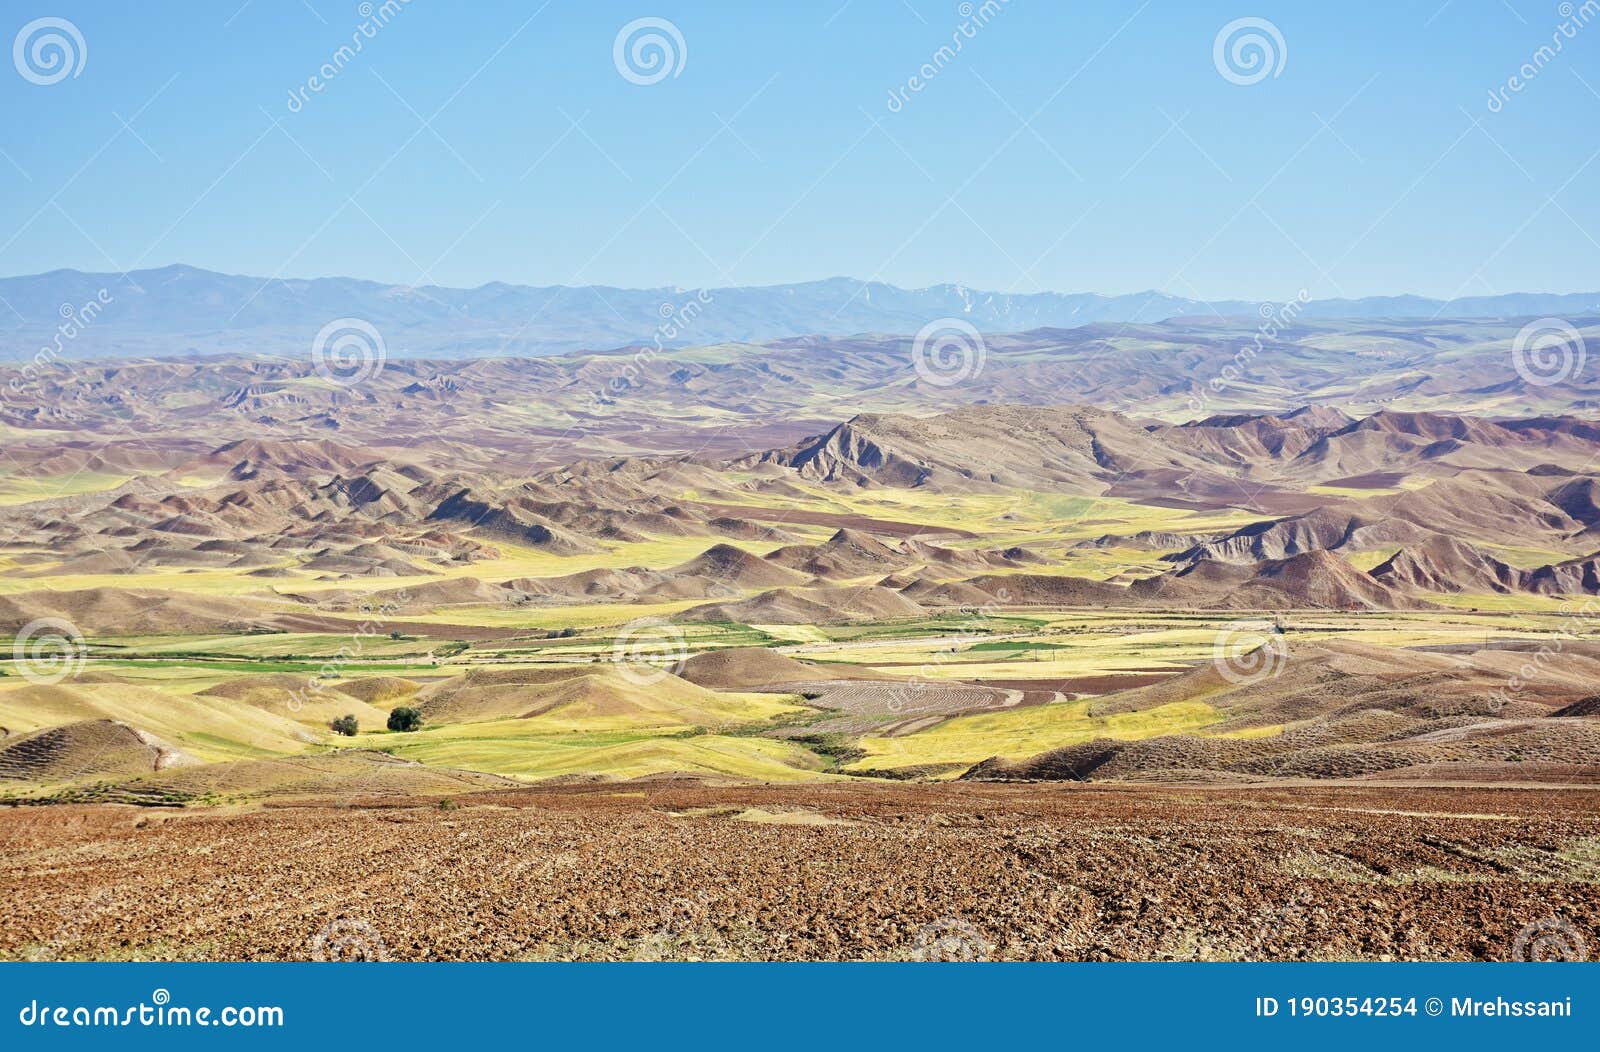 landscape of colorful red mountains and a hills